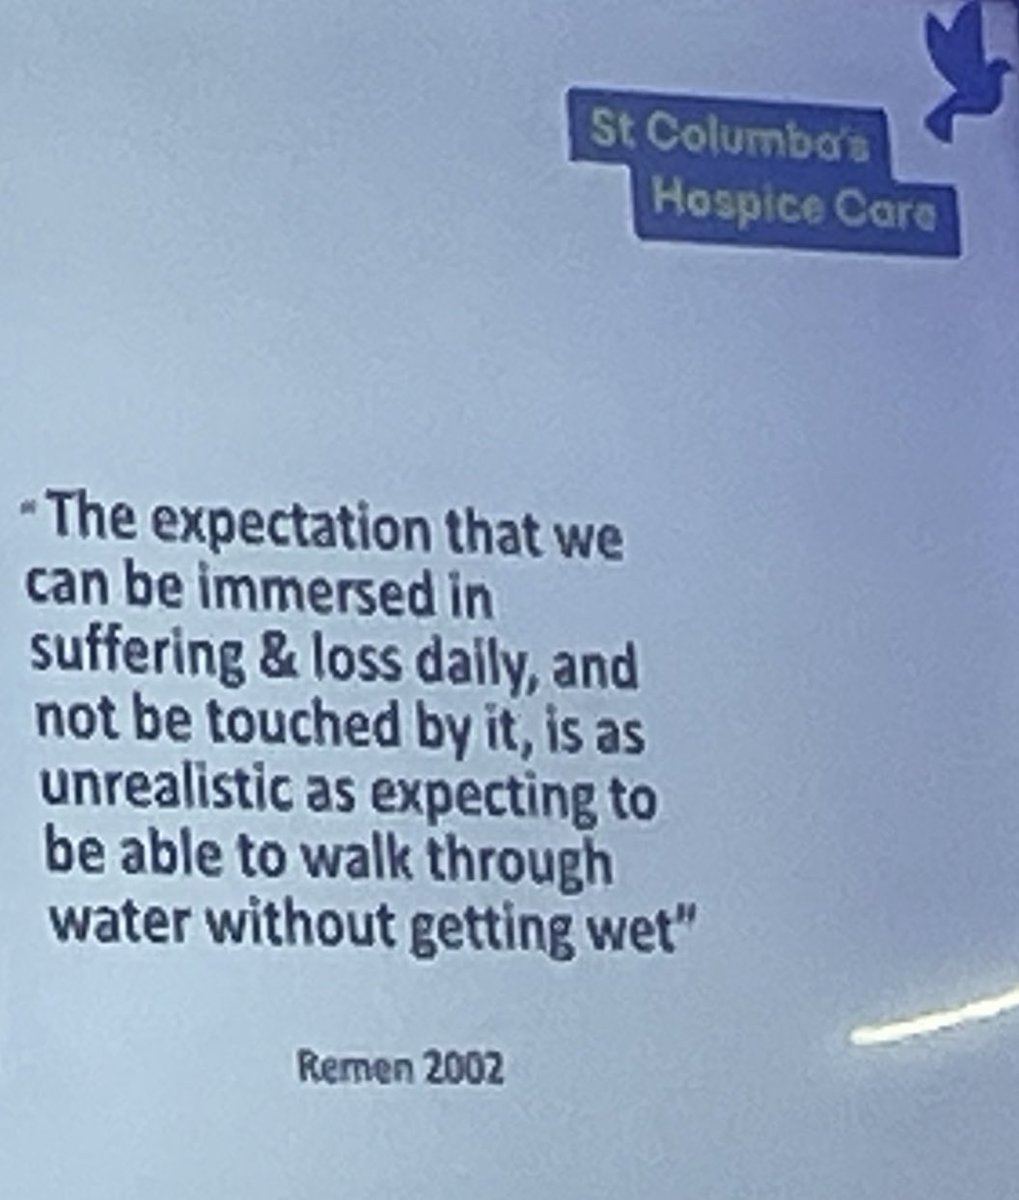 Wise words for delegates at our #hospiceworkforce conference about the impact on an individual of working & volunteering in a hospice from Sheila McGovern of  @StColumbas in Edinburgh